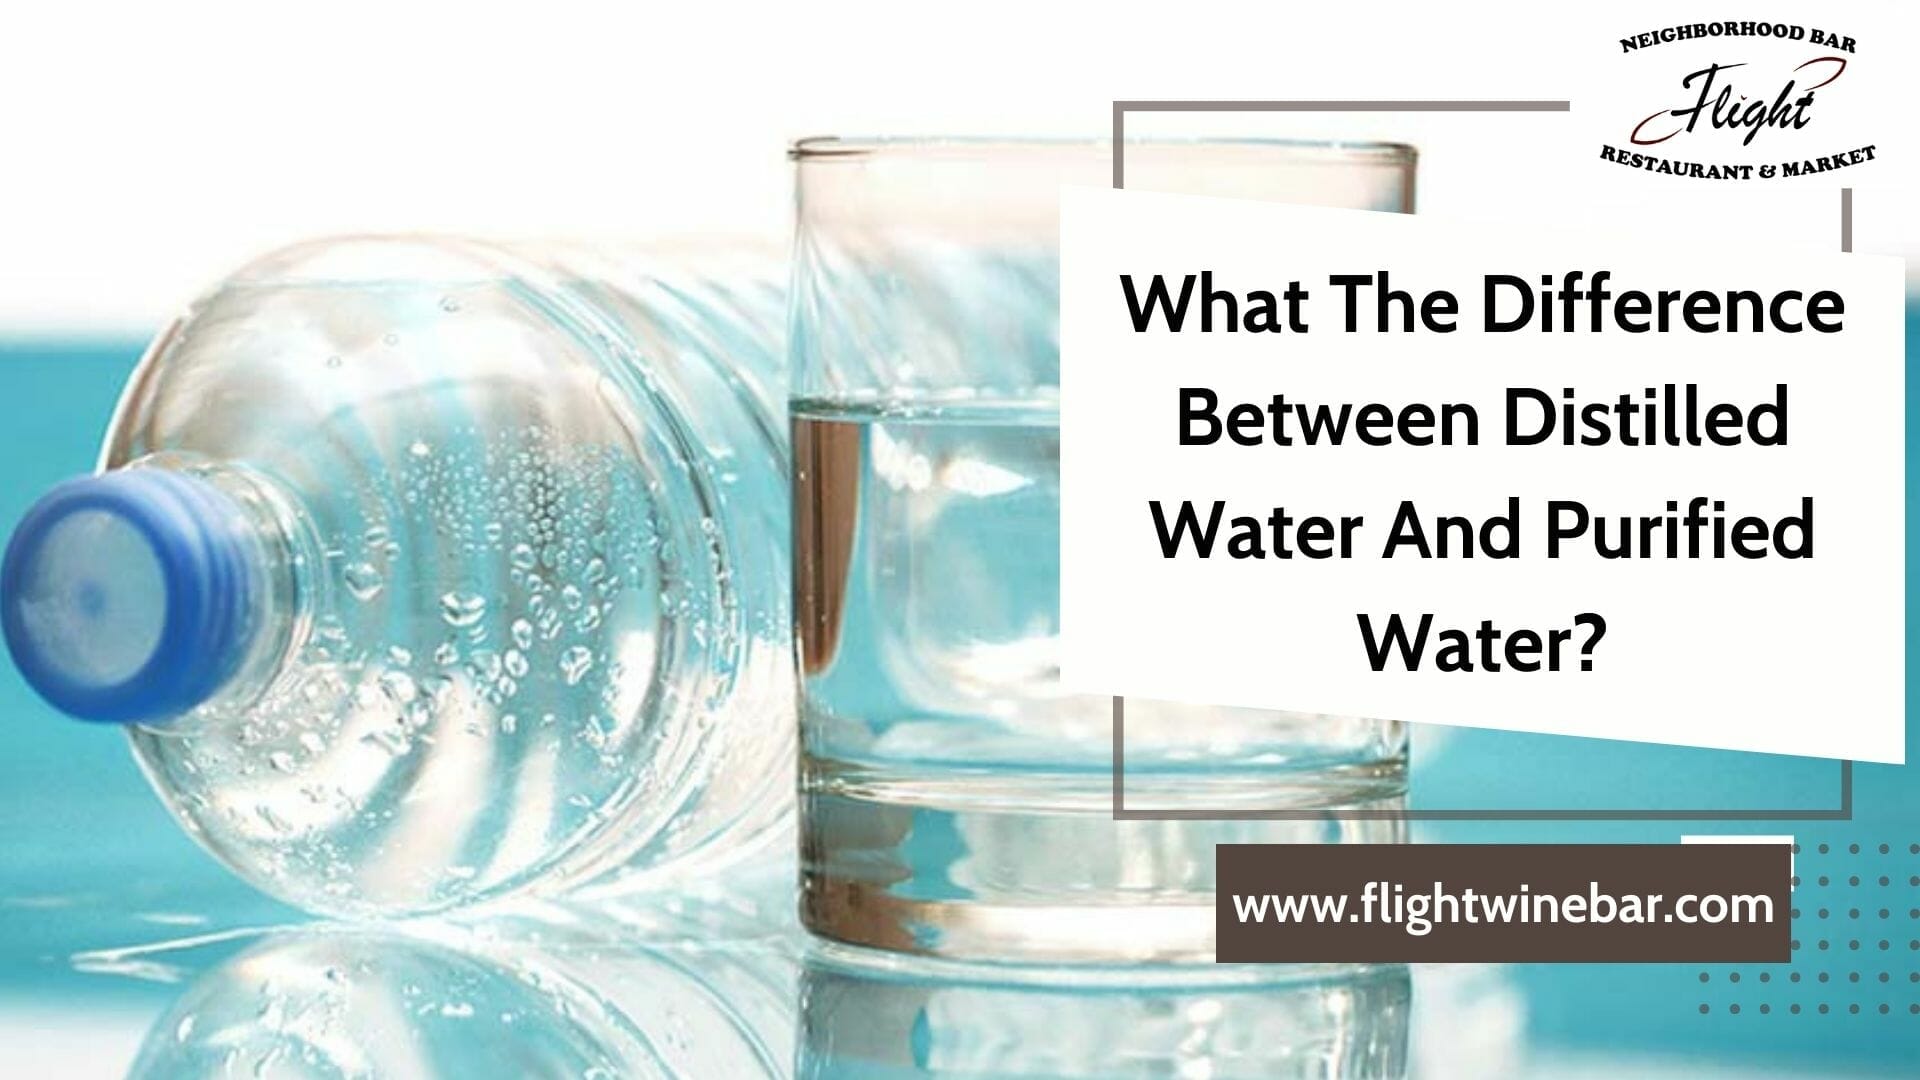 What The Difference Between Distilled Water And Purified Water